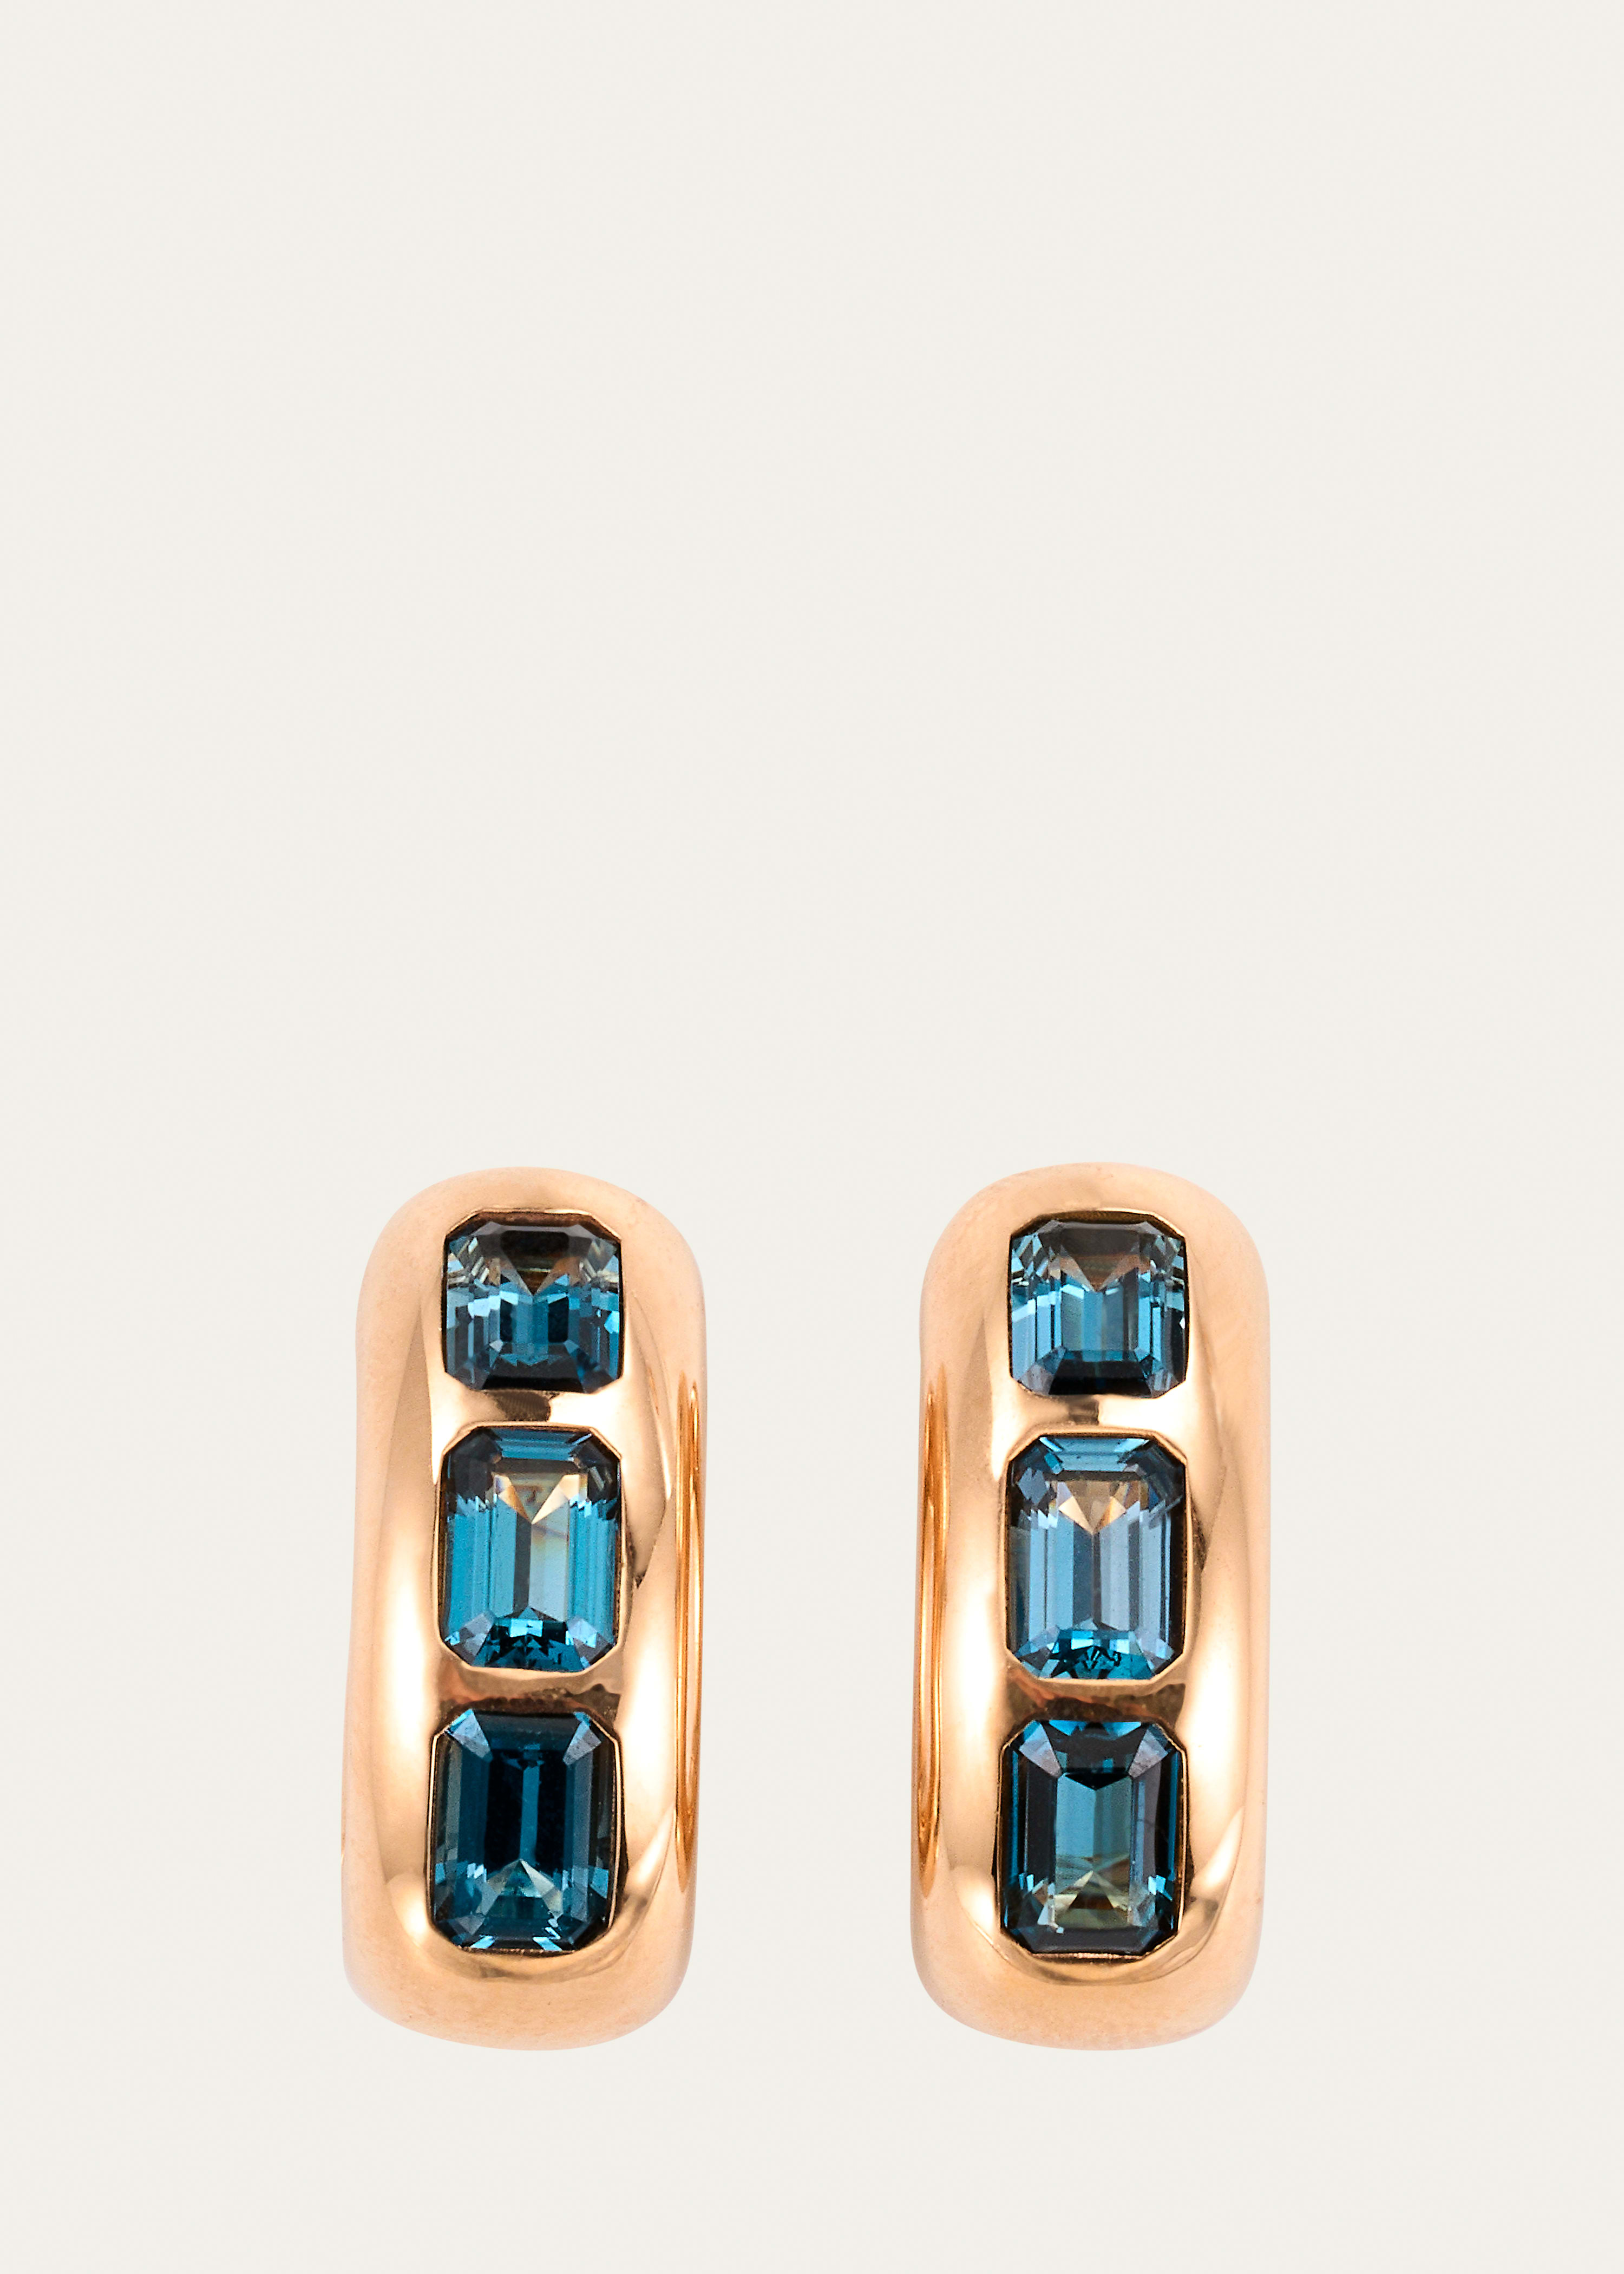 Pomellato 18k Rose Gold Iconica Earrings With London Blue Topaz